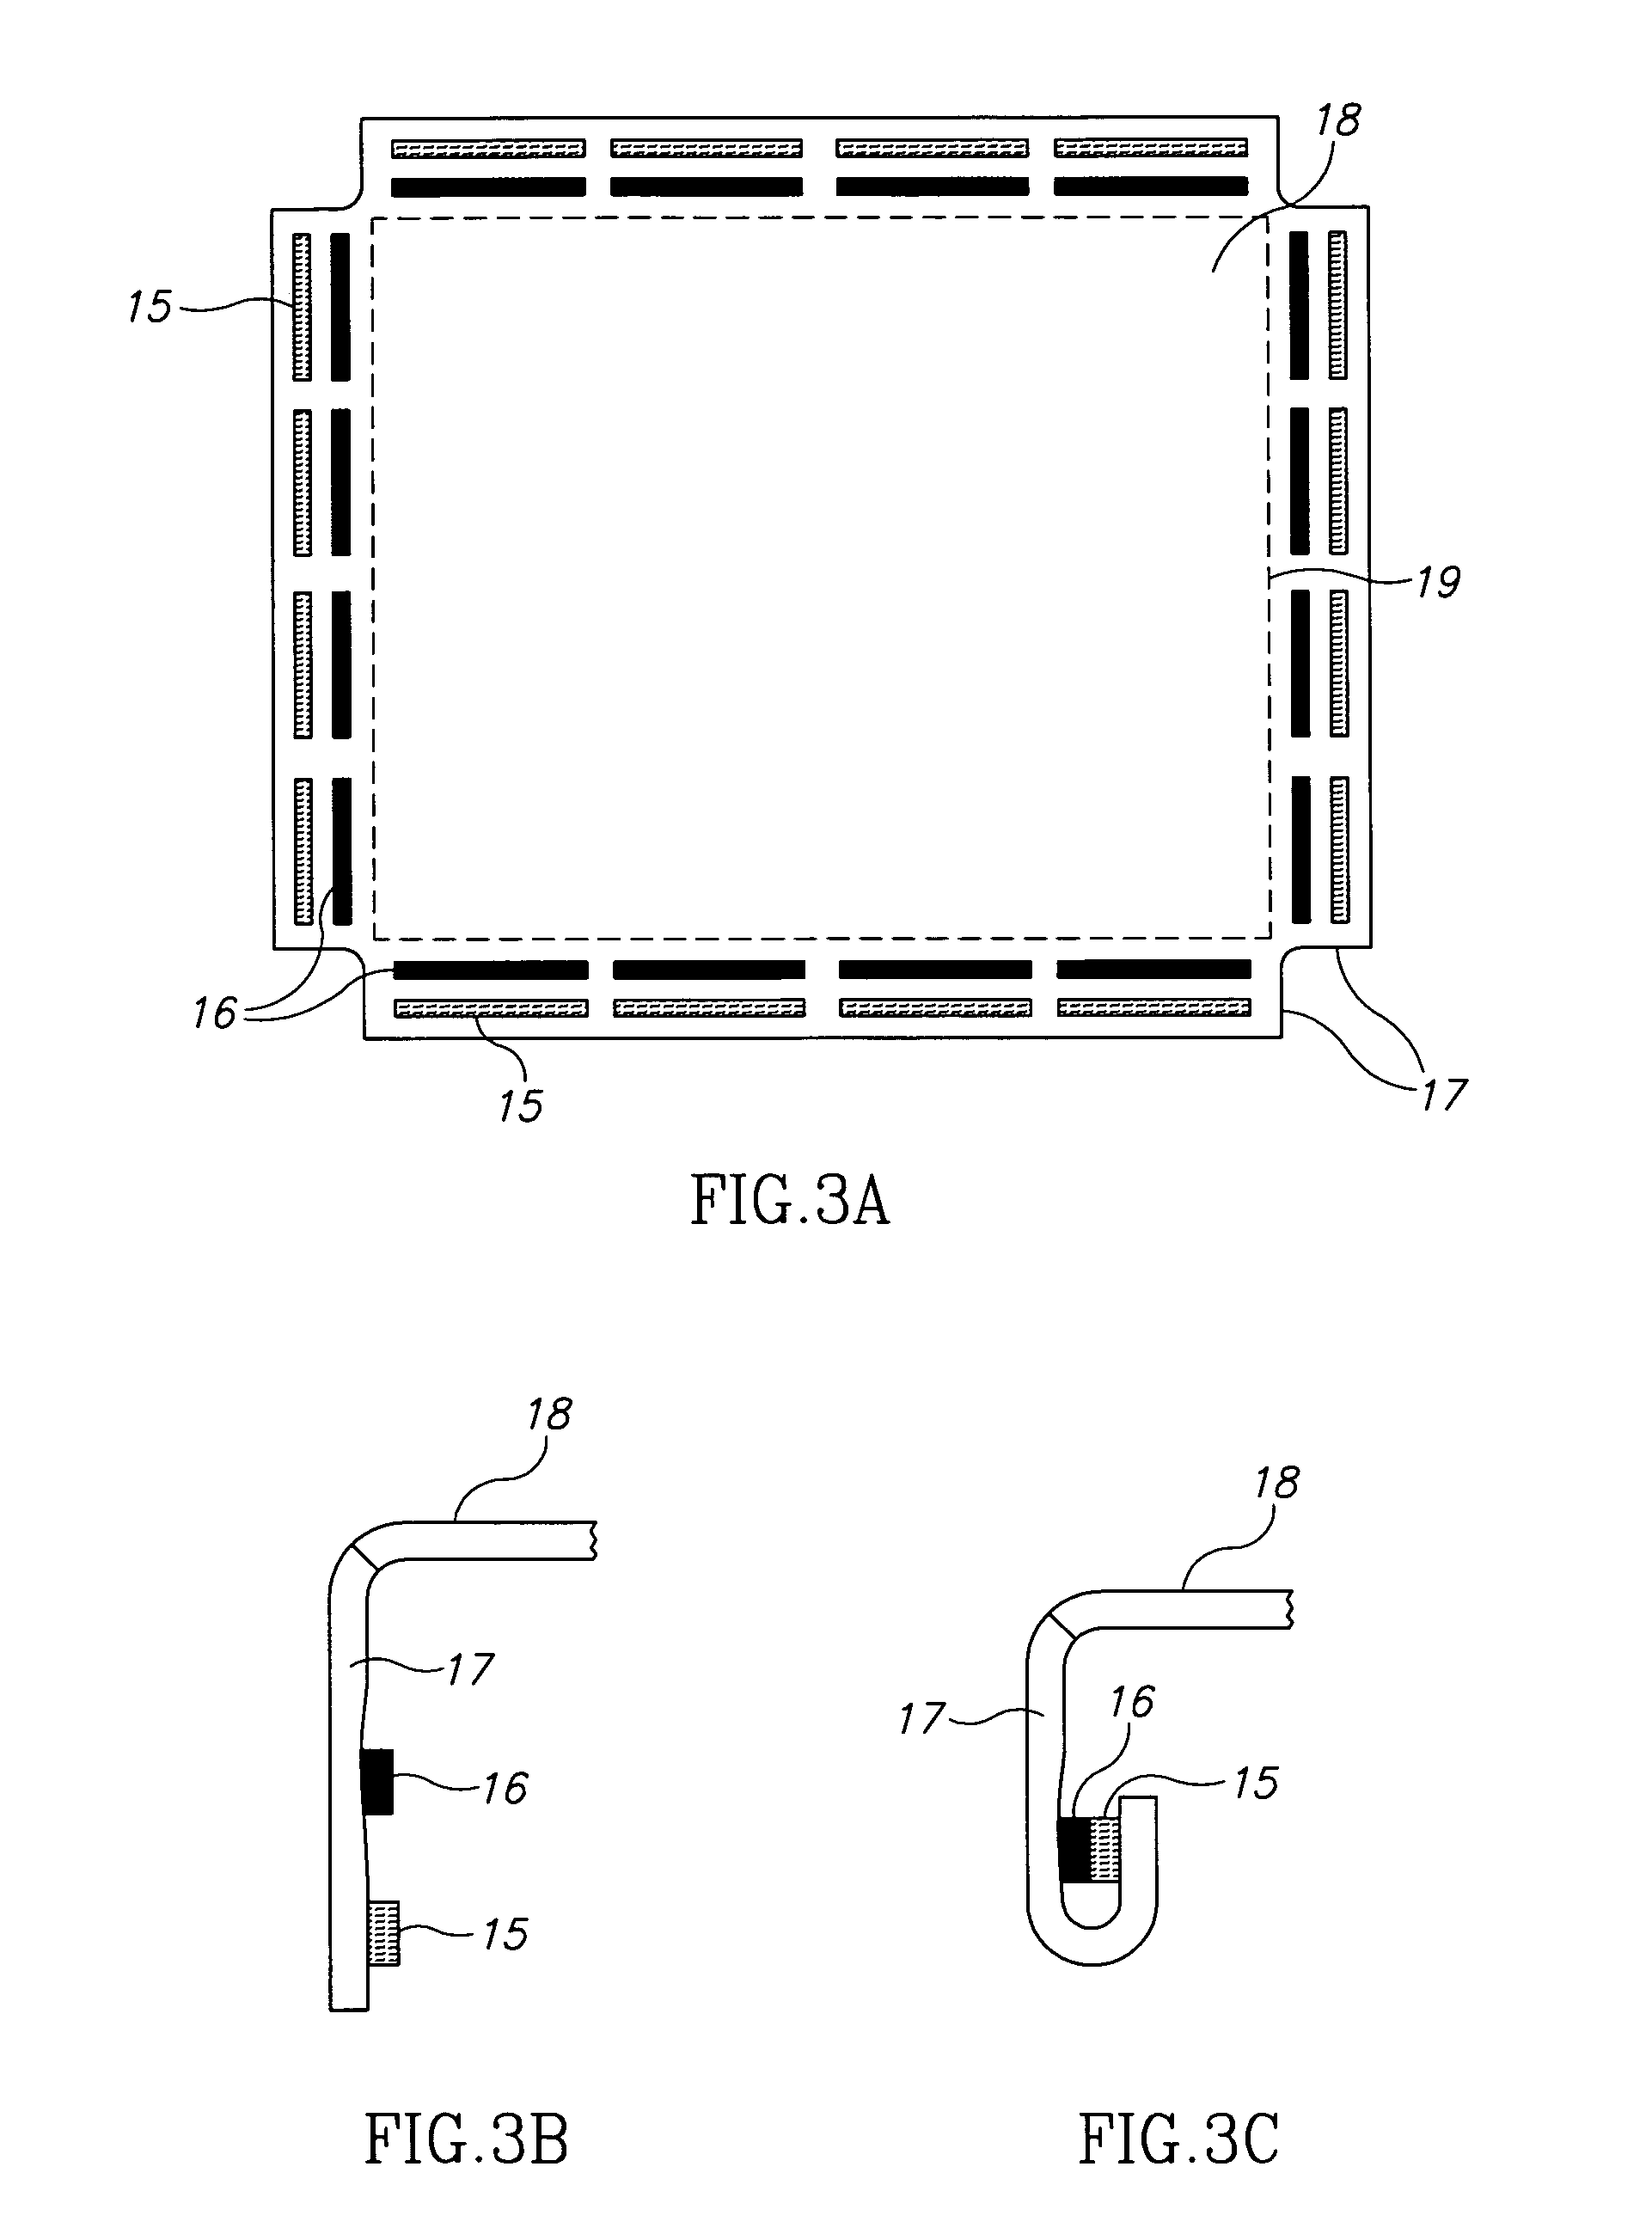 Method for fitting bedding to a mattress